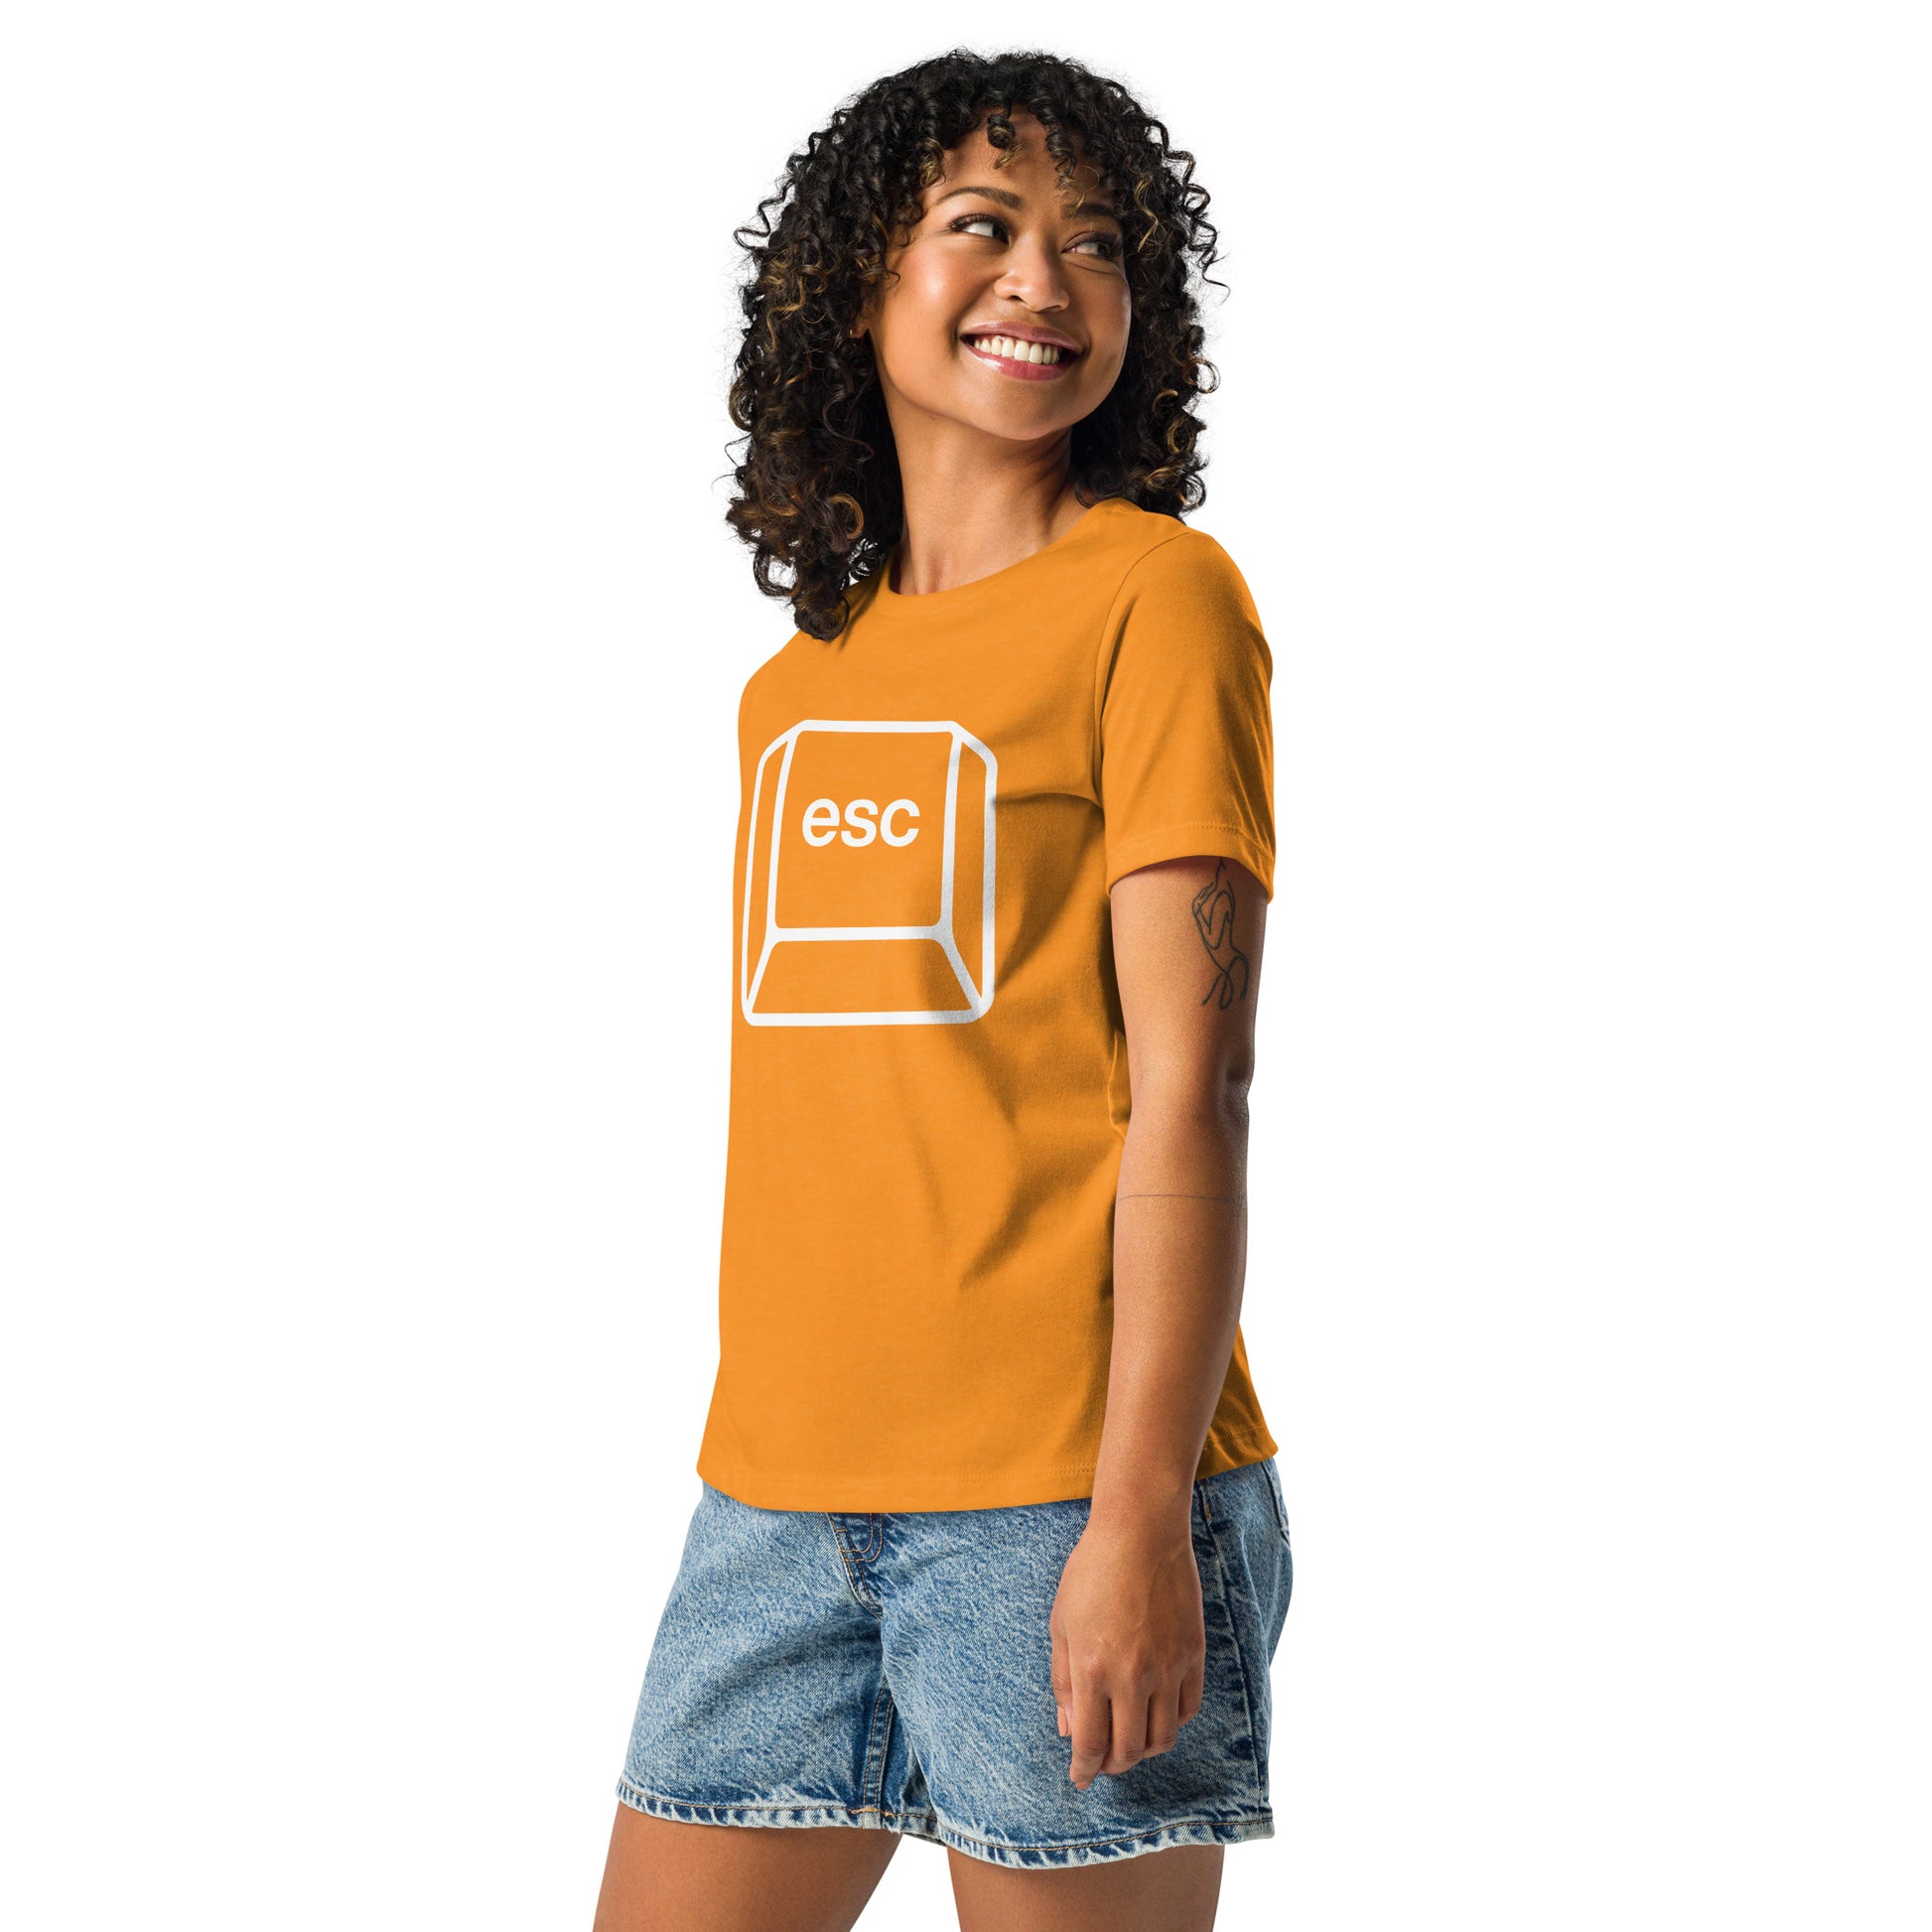 Woman with marmalade t-shirt with picture of esc key